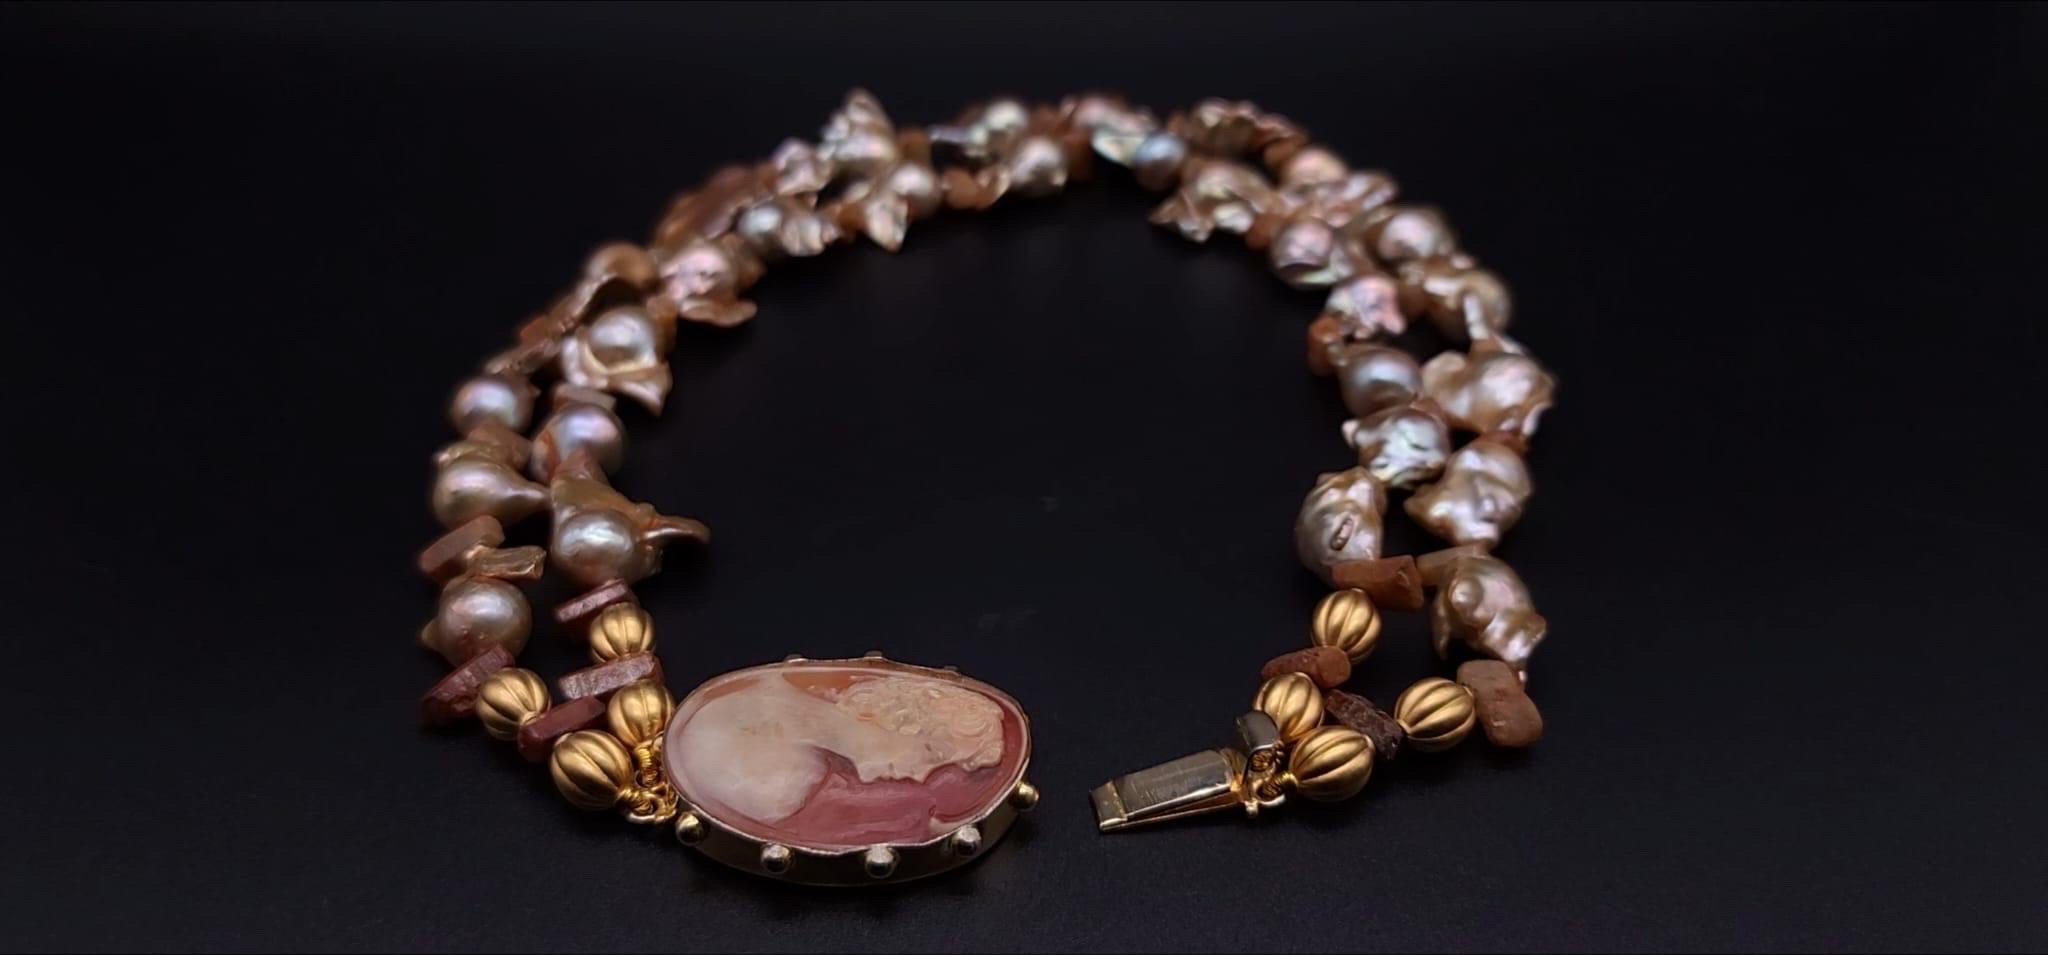 A.Jeschel Stunning Gold Baroque Pearl necklace with an Italian cameo side clasp. For Sale 3